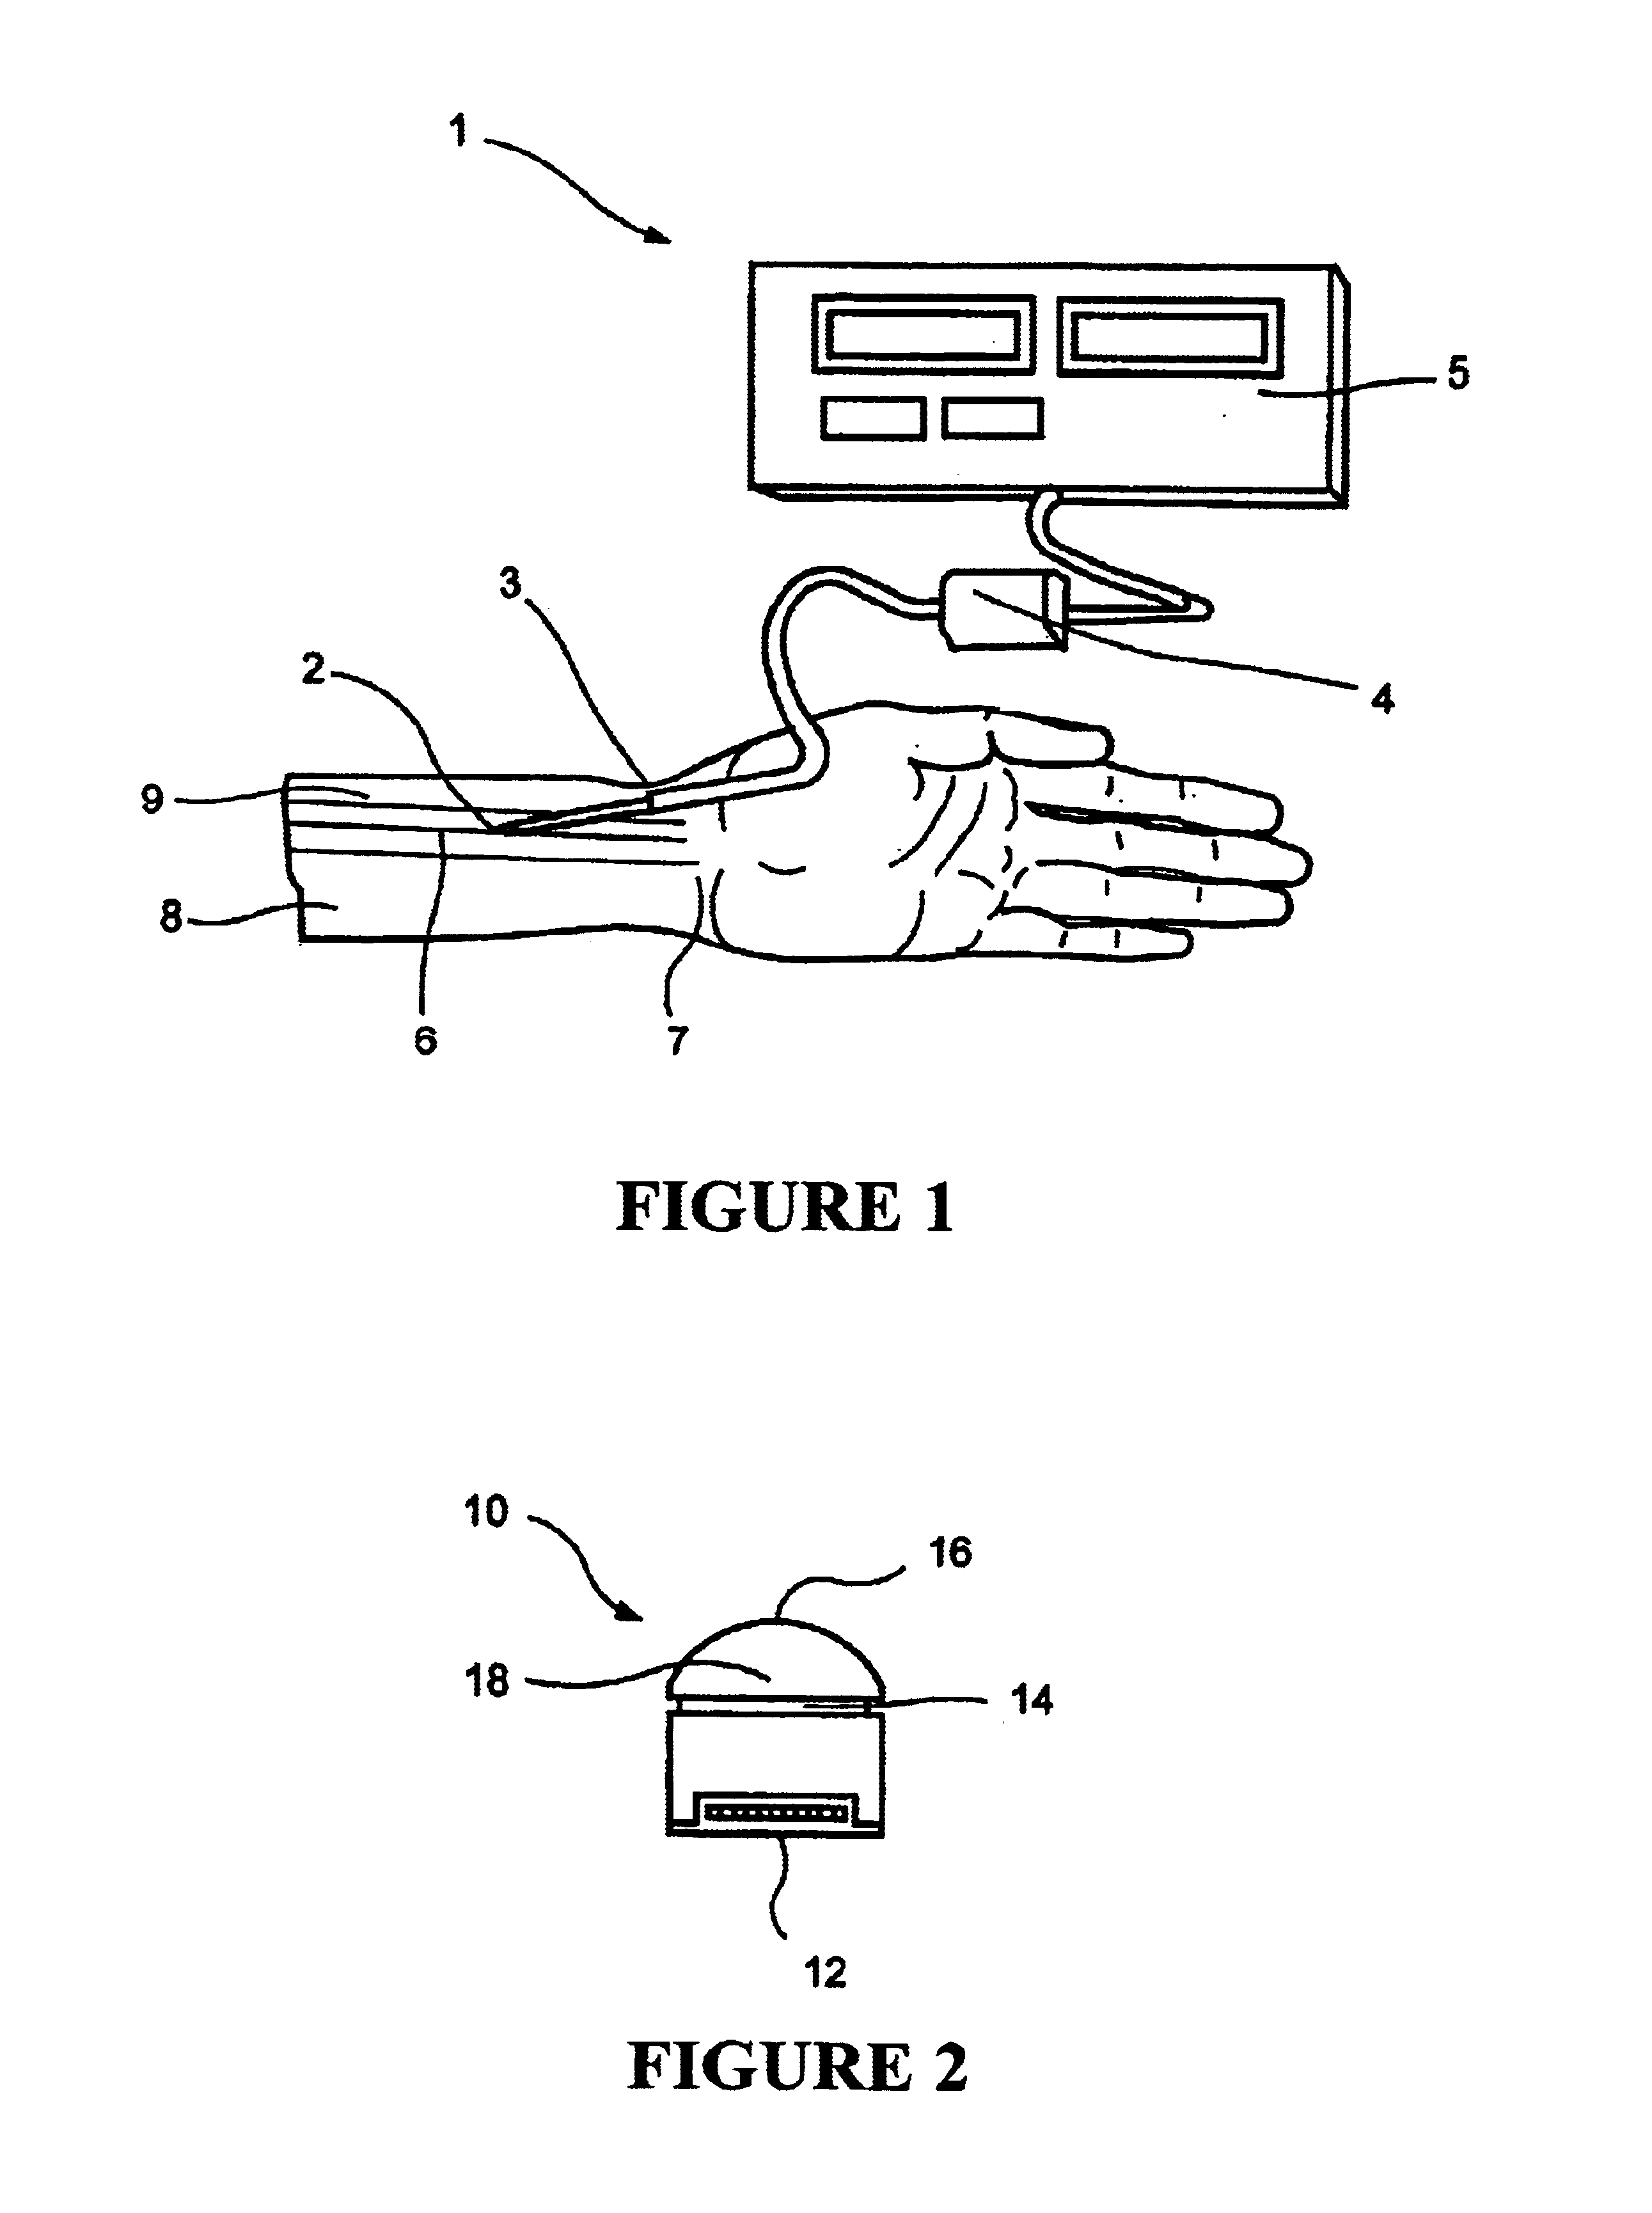 Method and device for monitoring blood pressure